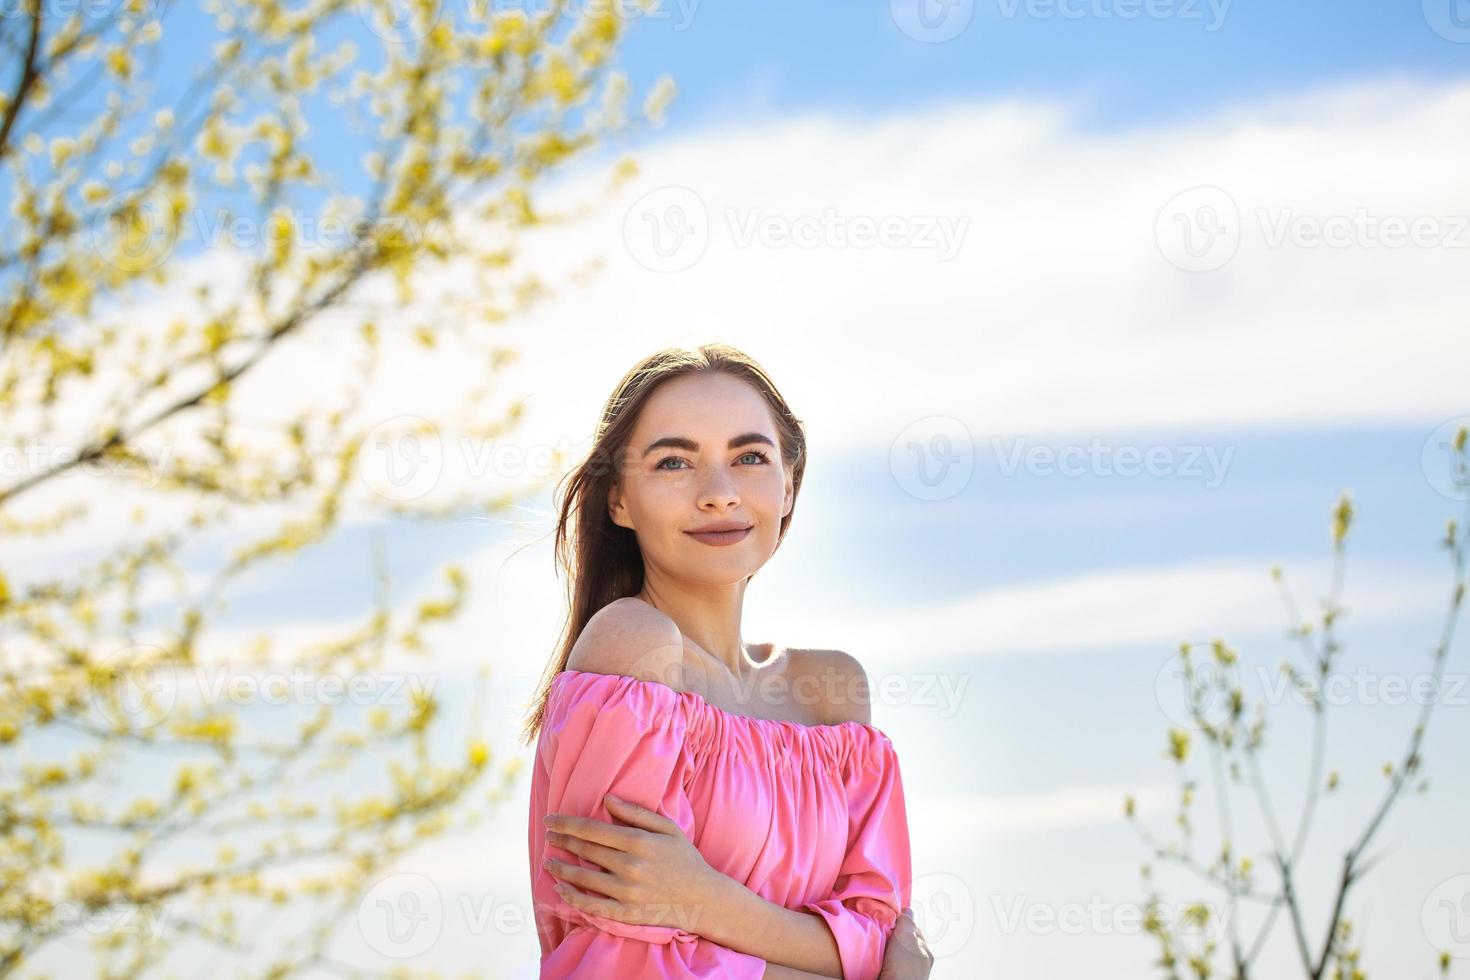 Beautiful young woman with a well-groomed face on a natural background photo